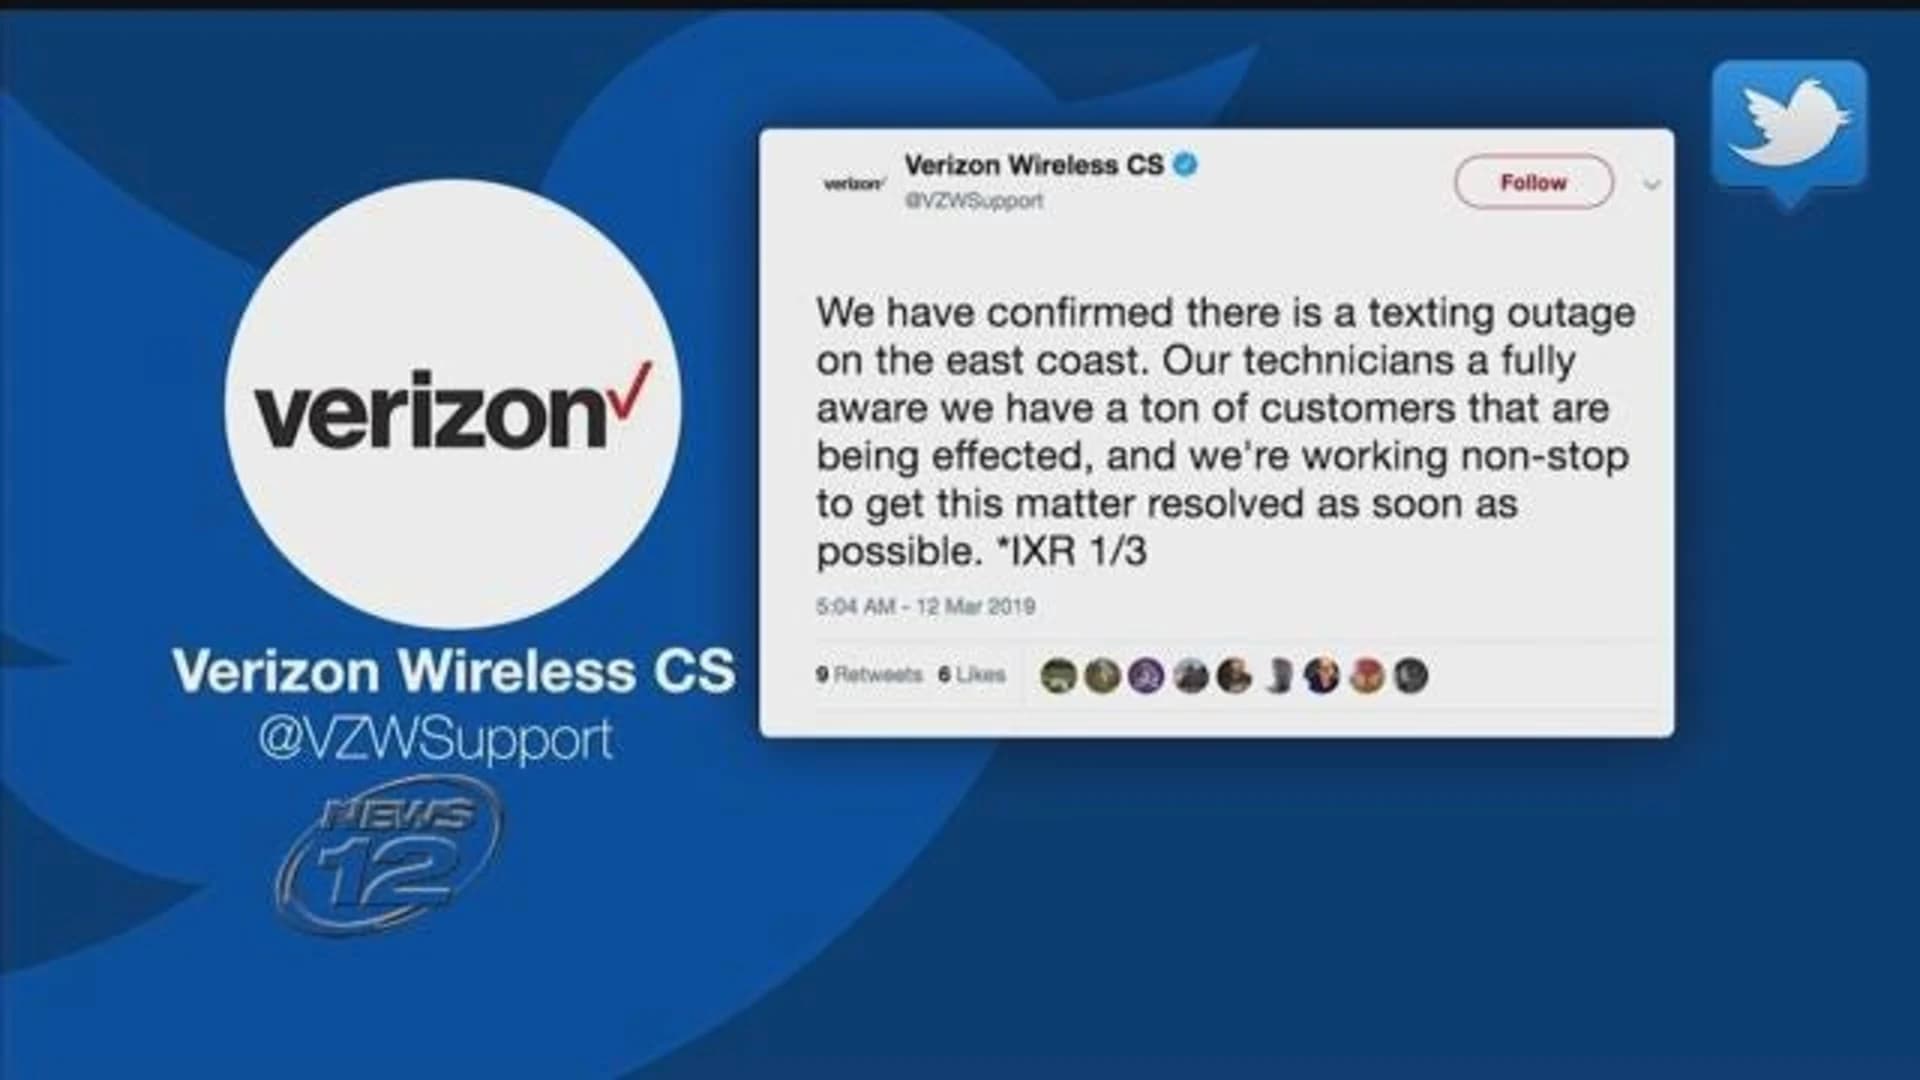 Verizon reports texting service repaired after East Coast outage